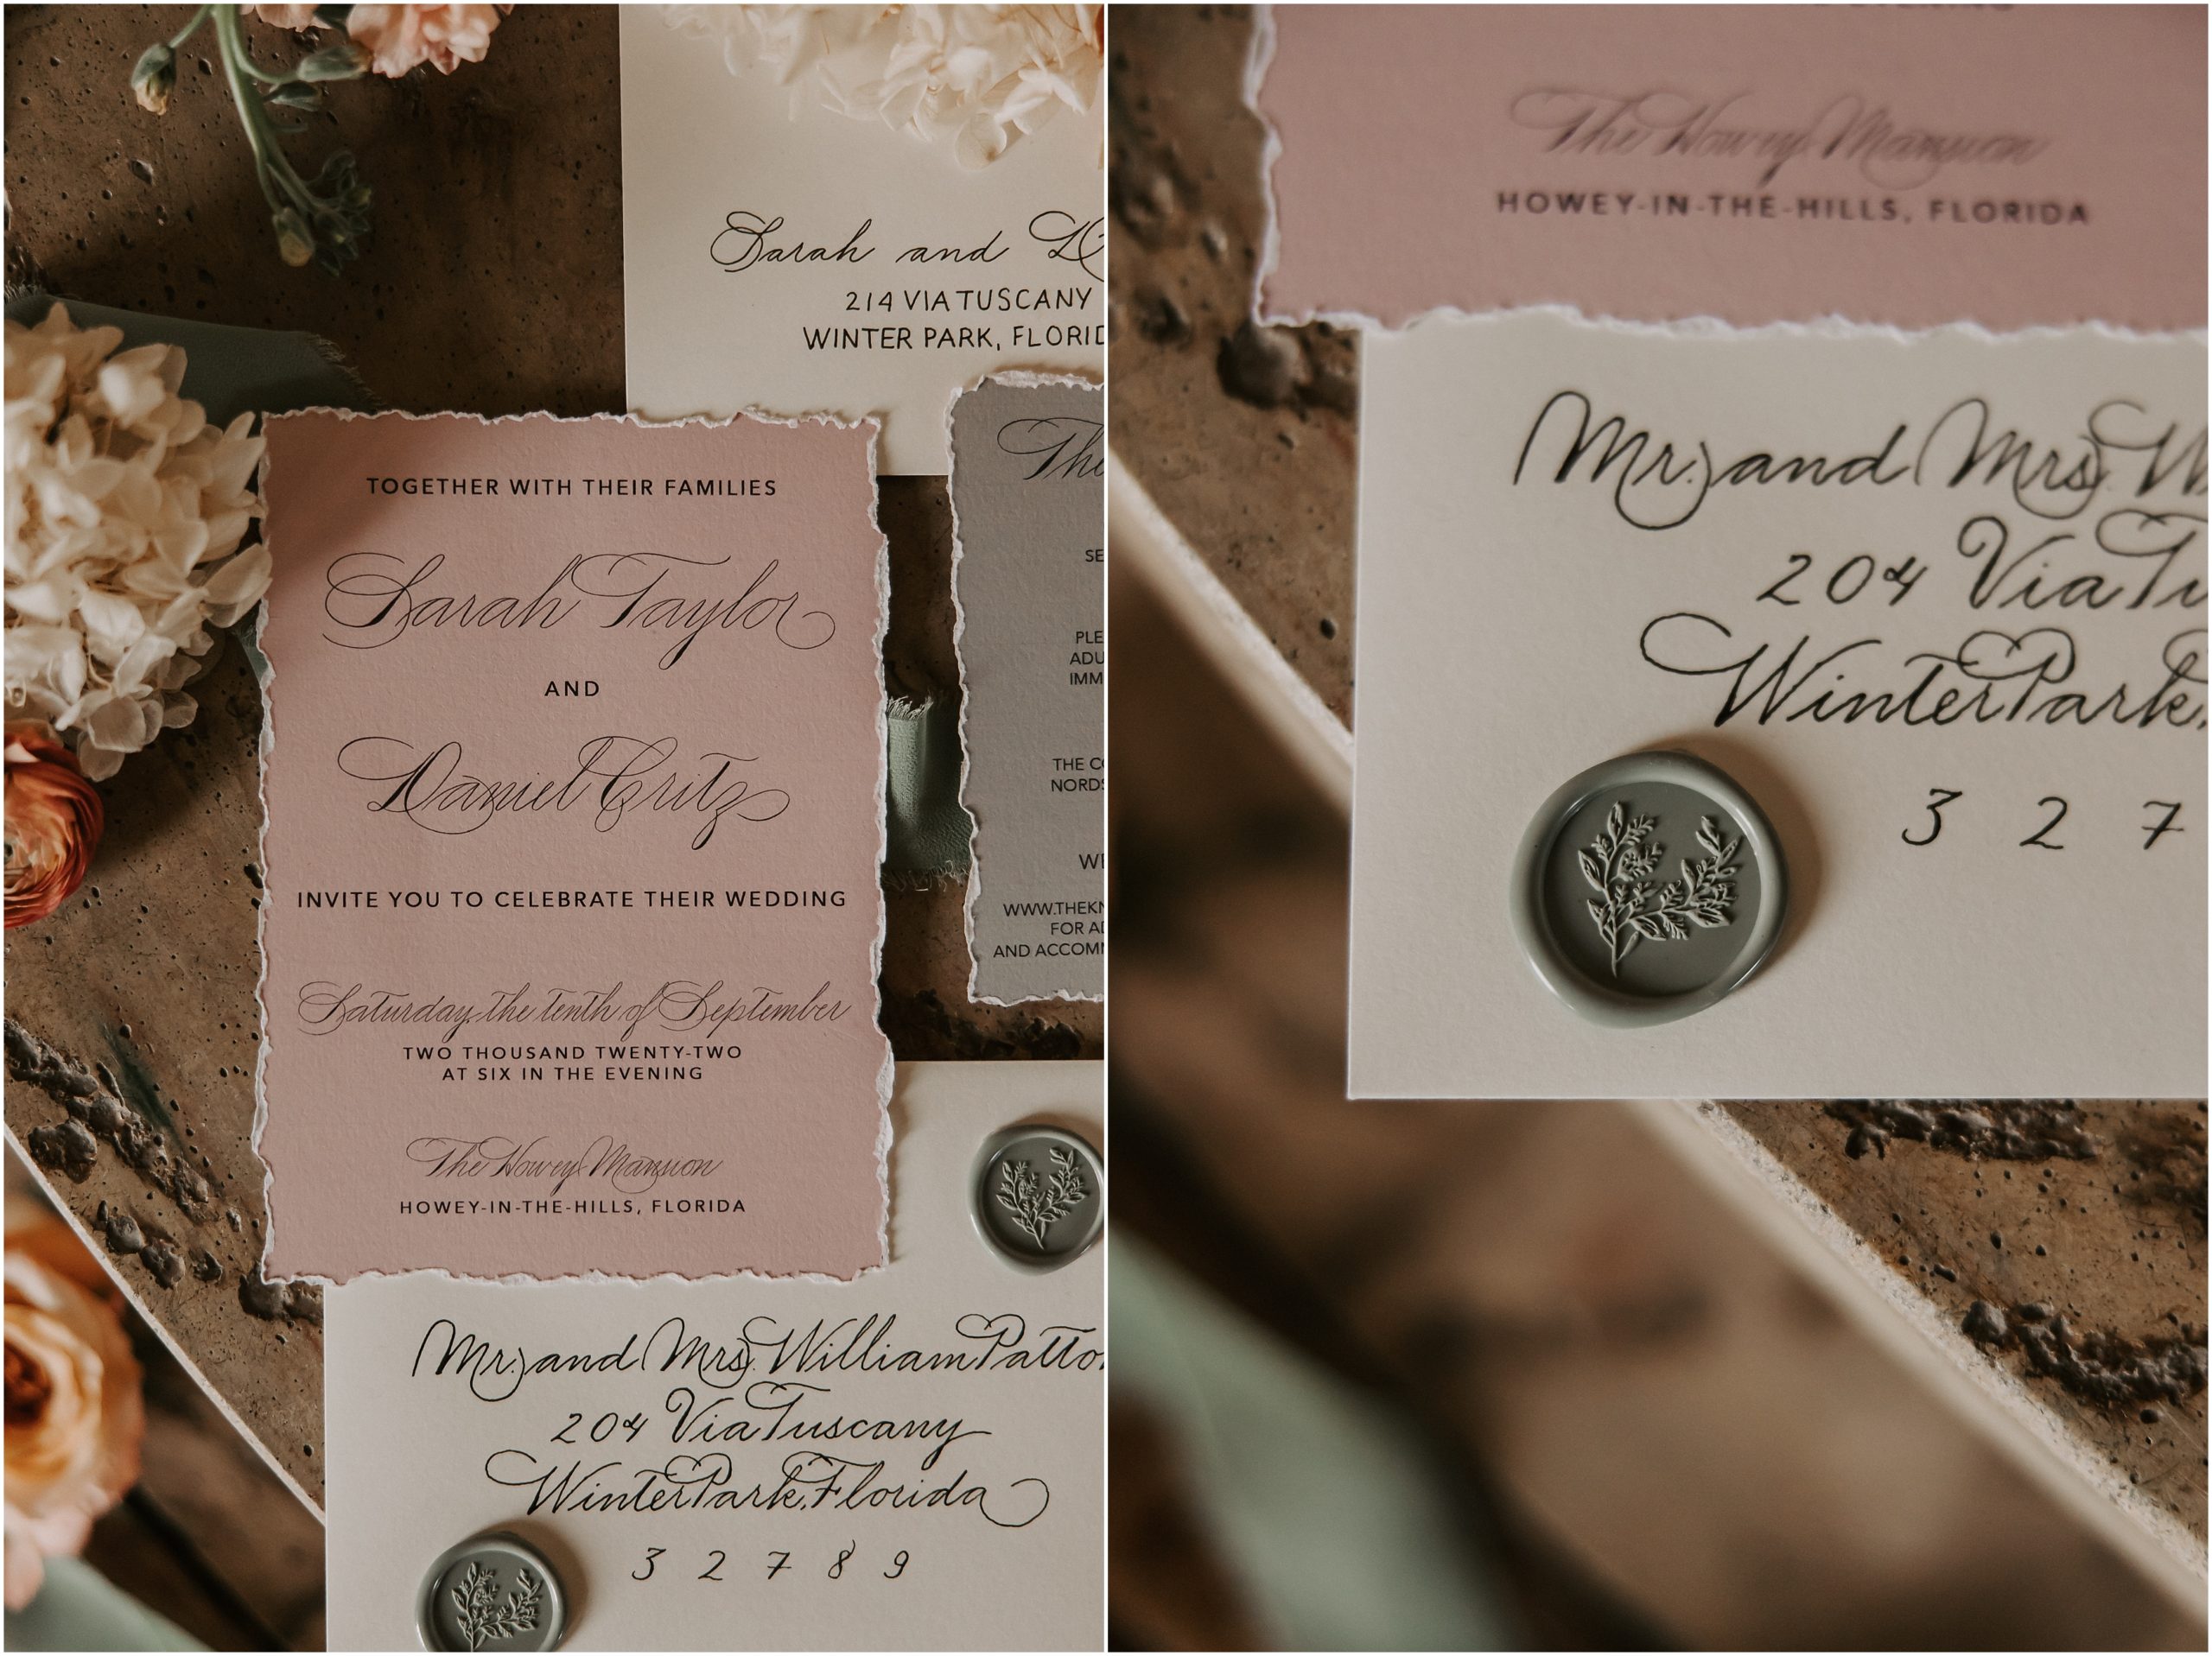 This stunning invitation suite concentrated on the “middle of the muted rainbow” hues like peach, yellows, dusty blues and sage greens, trying not to focus solely on one color.